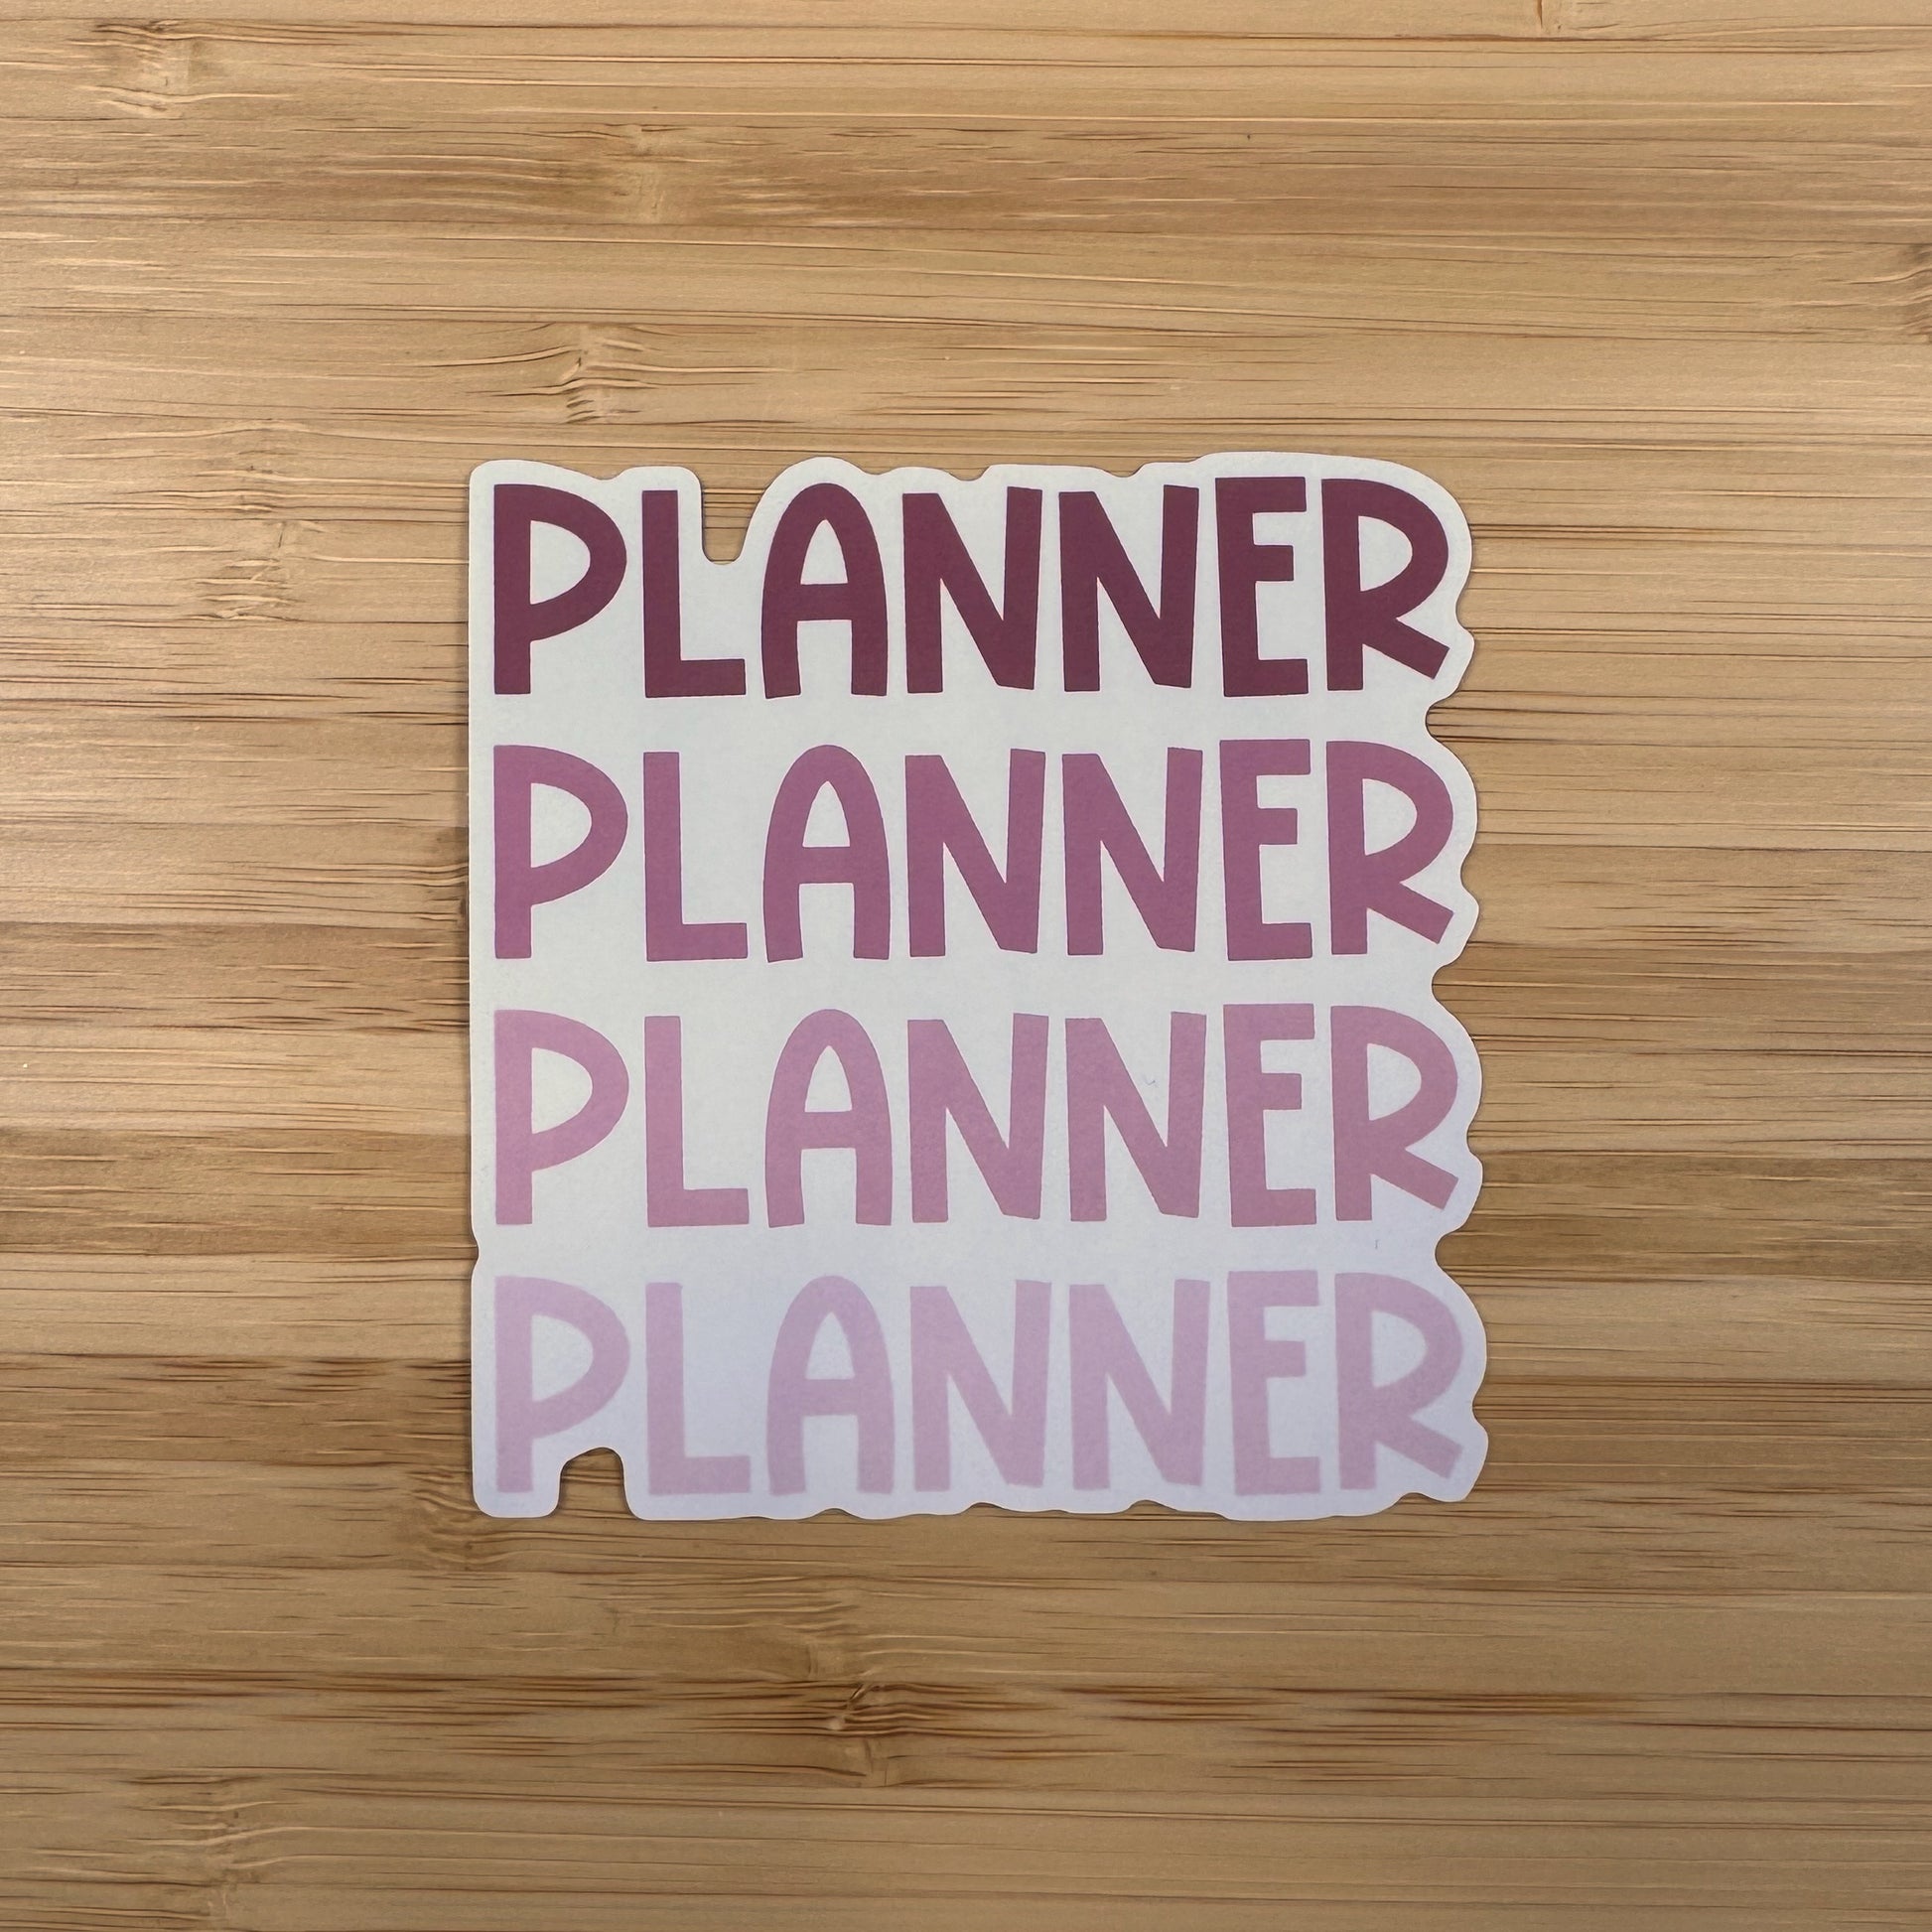 a planner sticker on a wooden surface